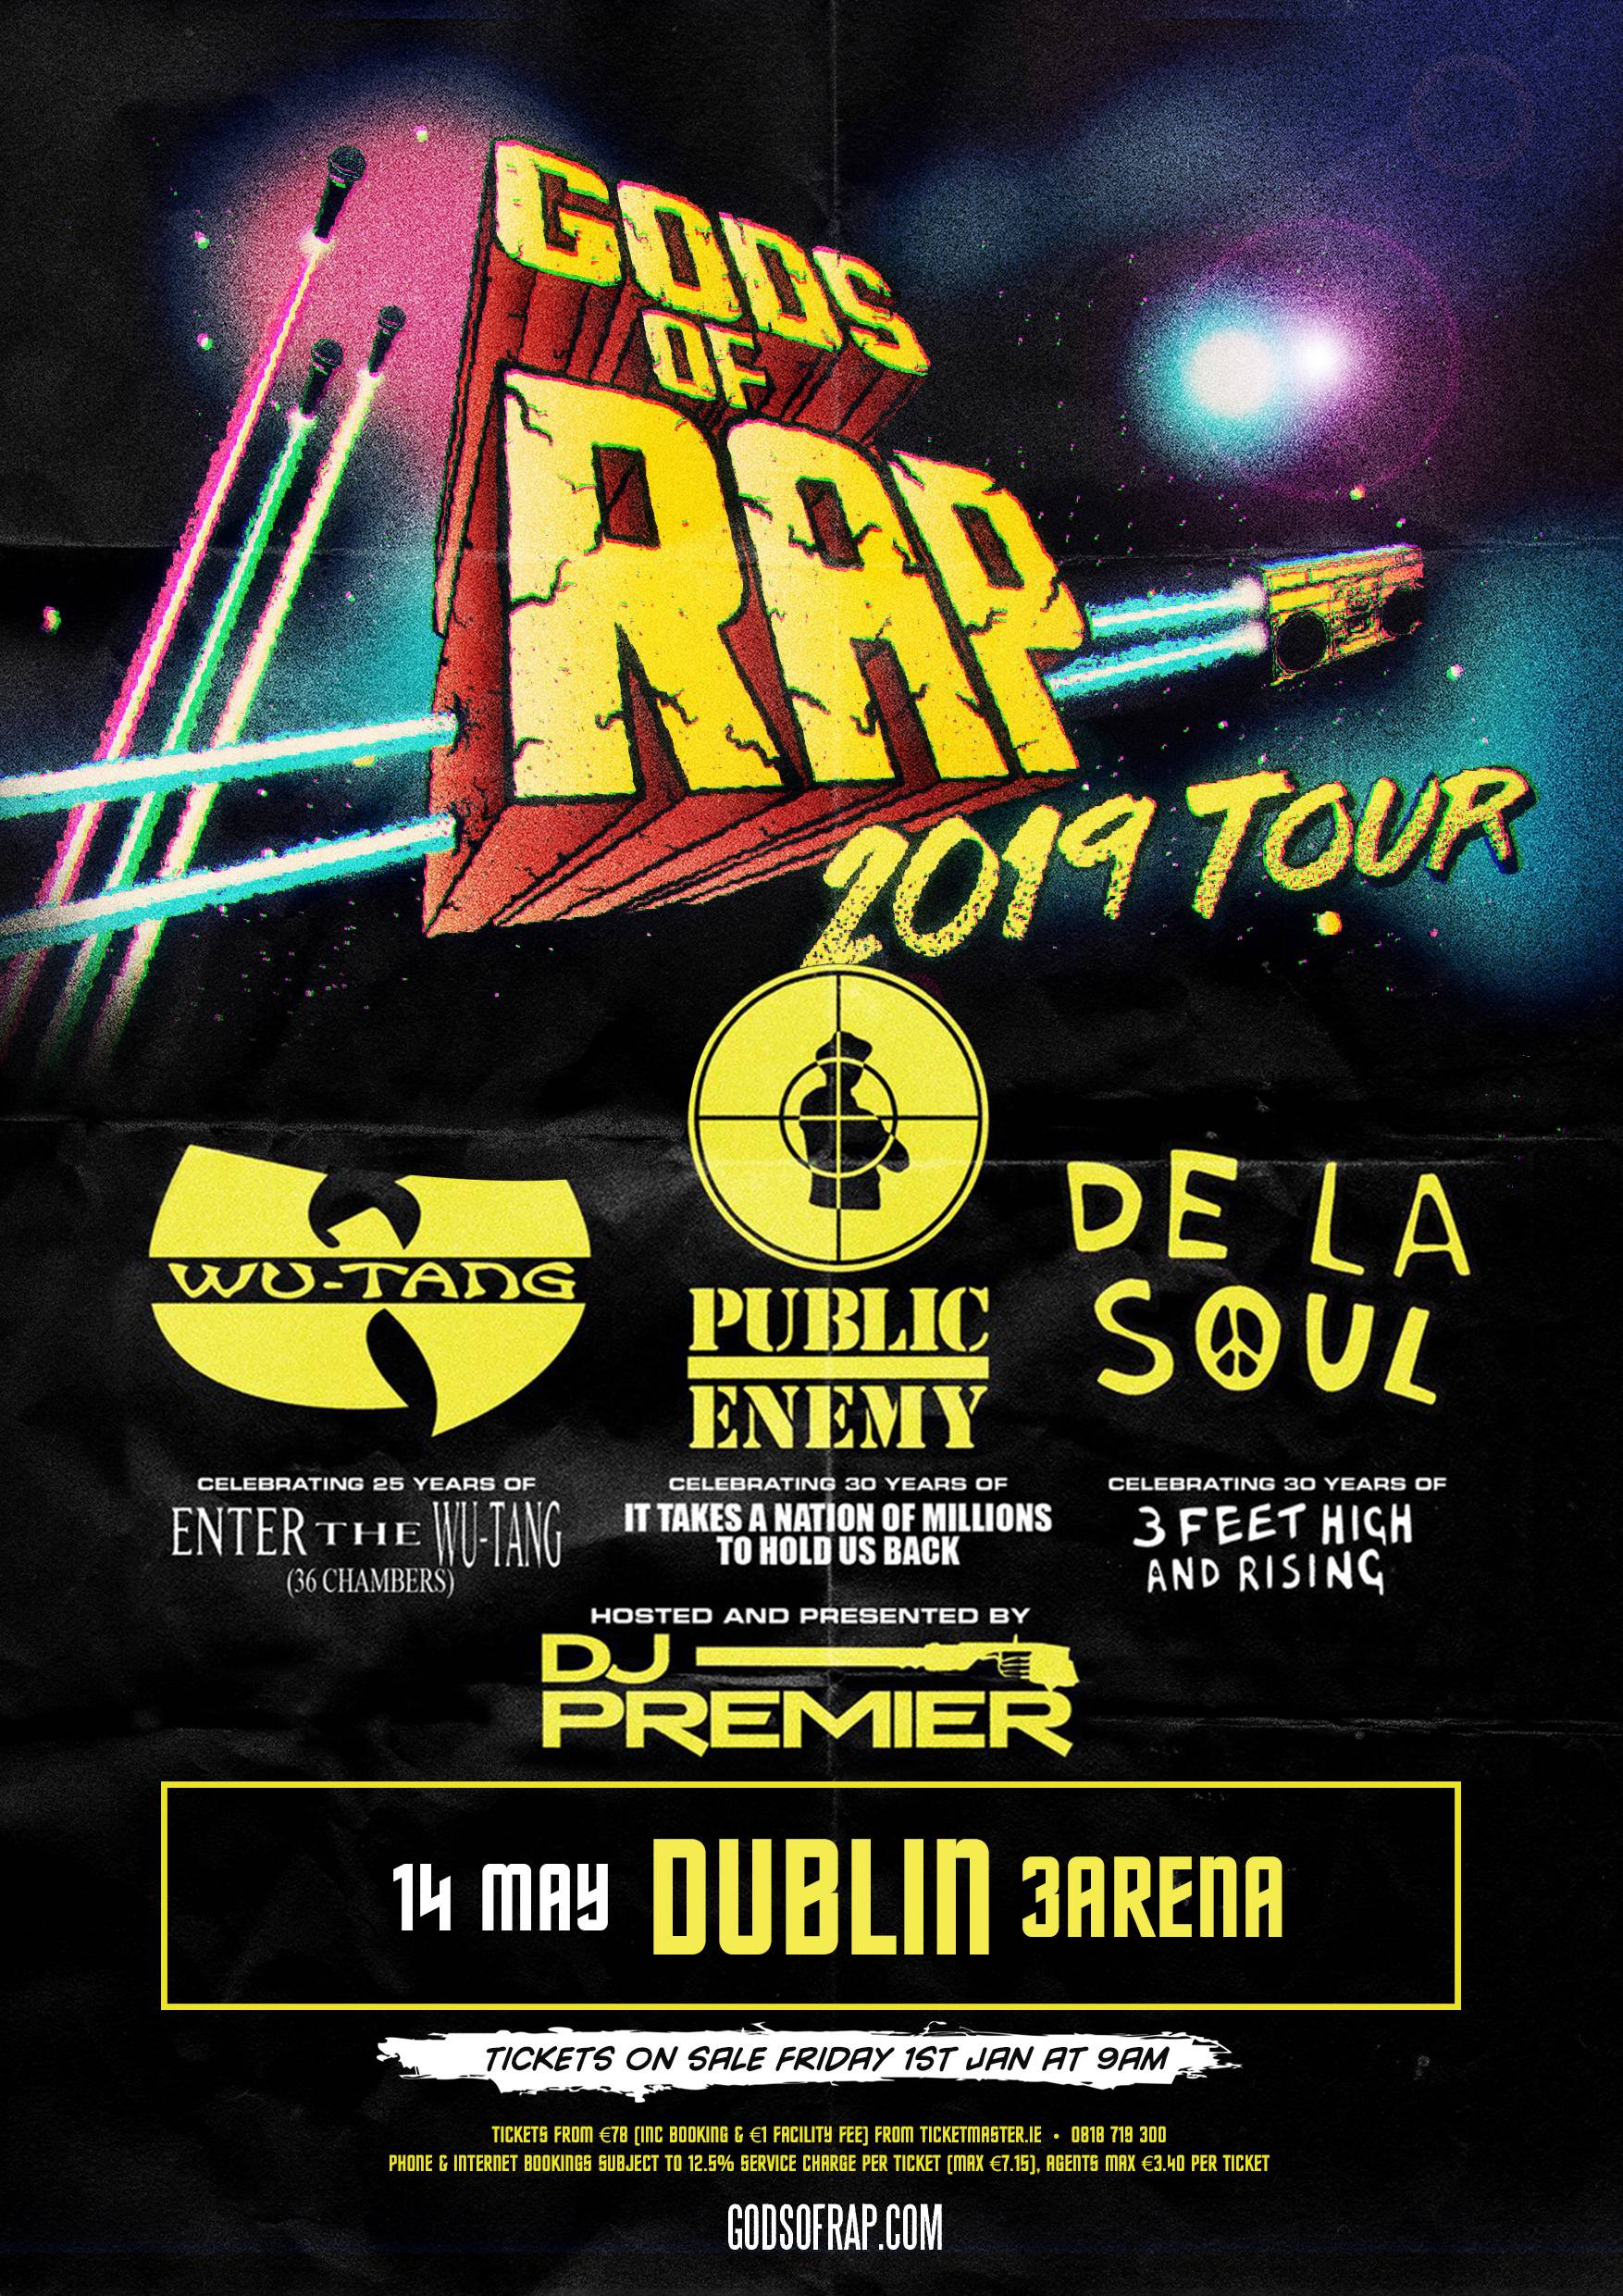 Chemicus Wiskundig rijm 3Arena on Twitter: "God's of Rap Tour 2019 with Wu-Tang Clan, Public Enemy  &amp; De La Soul hosted by the legendary DJ Premier🔥 ❌Three of the world's  greatest and most influential rap